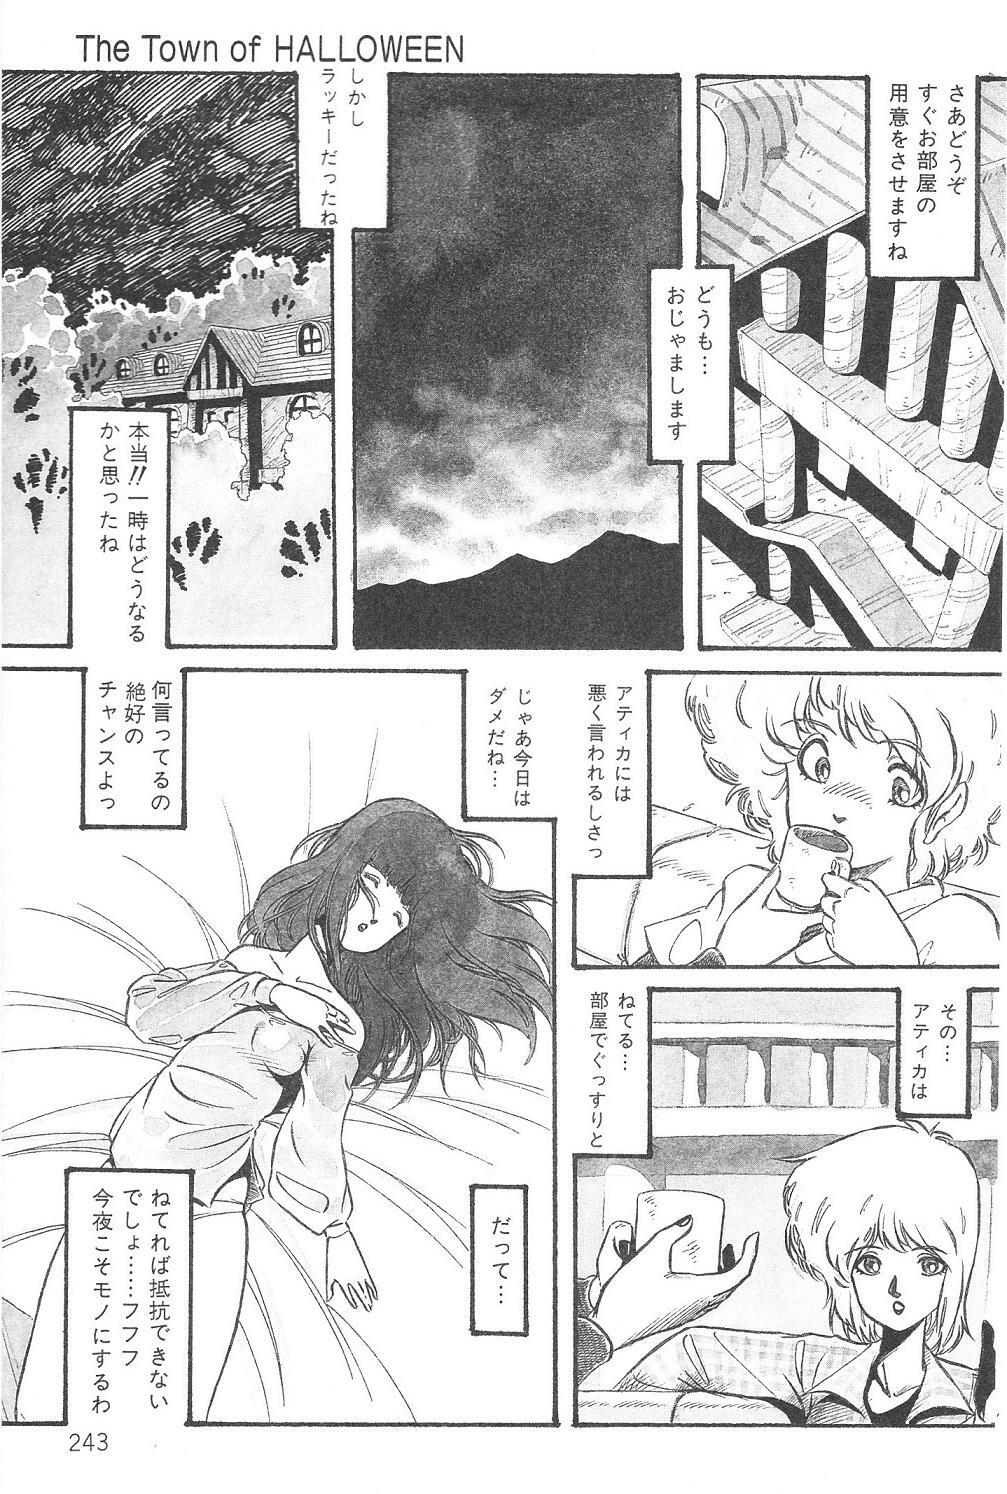 Aran-Rei THE TOWN OF HELLOWEEN page 9 full